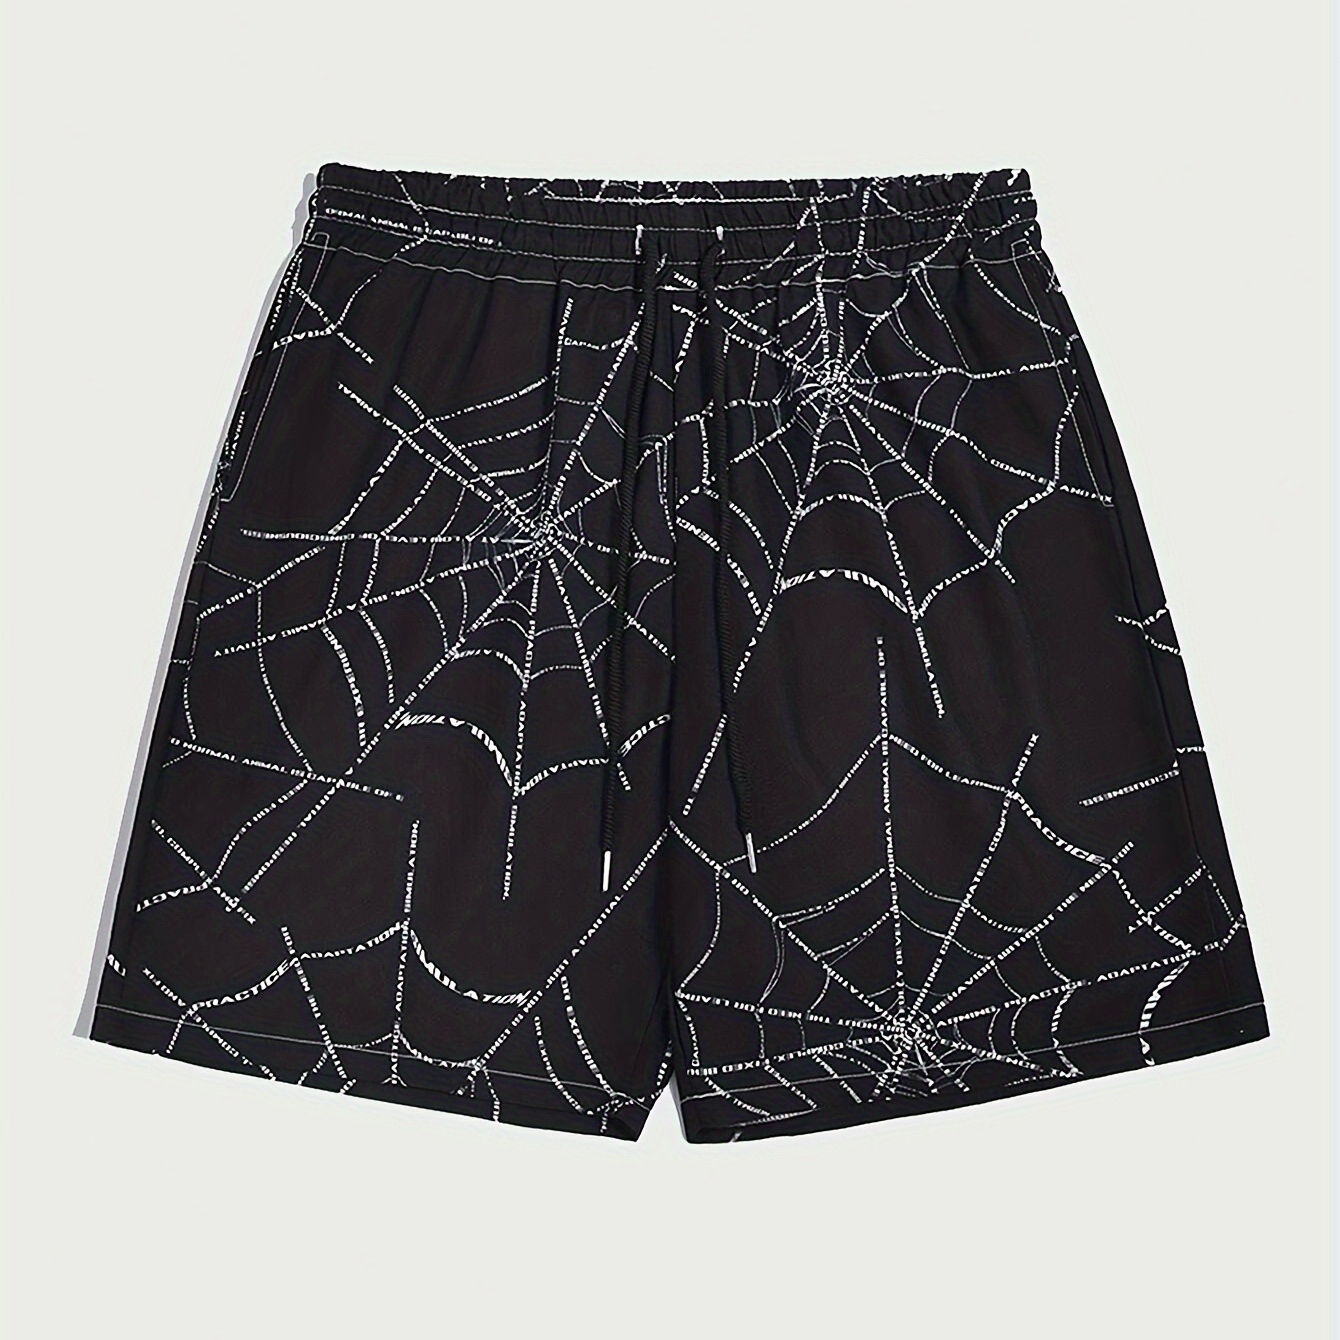 

Spider Web Pattern 3d Printed Men's Loose Beach Shorts Activewear, Drawstring Quick Dry Shorts, Lightweight Shorts For Summer Beach Holiday Surfing